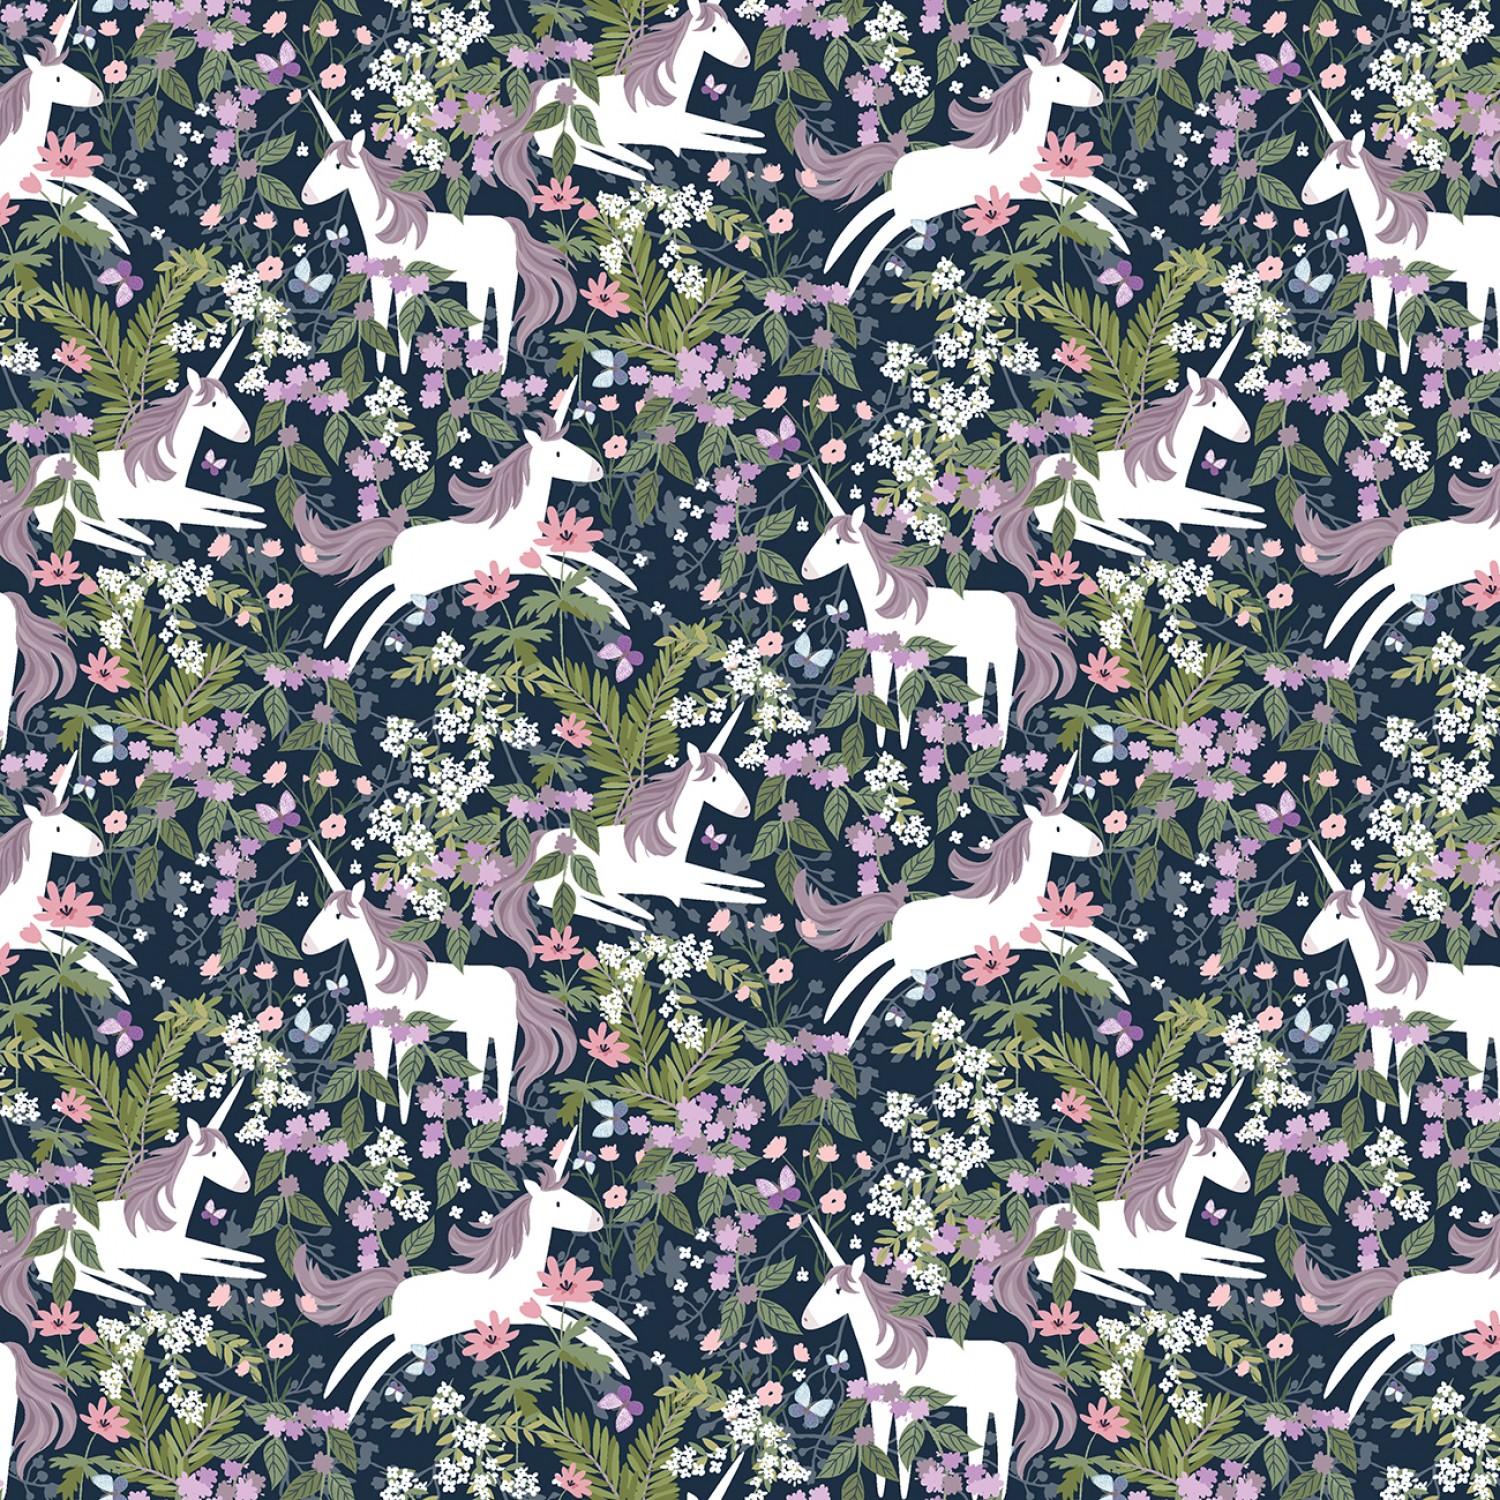 Little Bit Of Magic - Unicorn in Magical Forest - CD8868-Navy